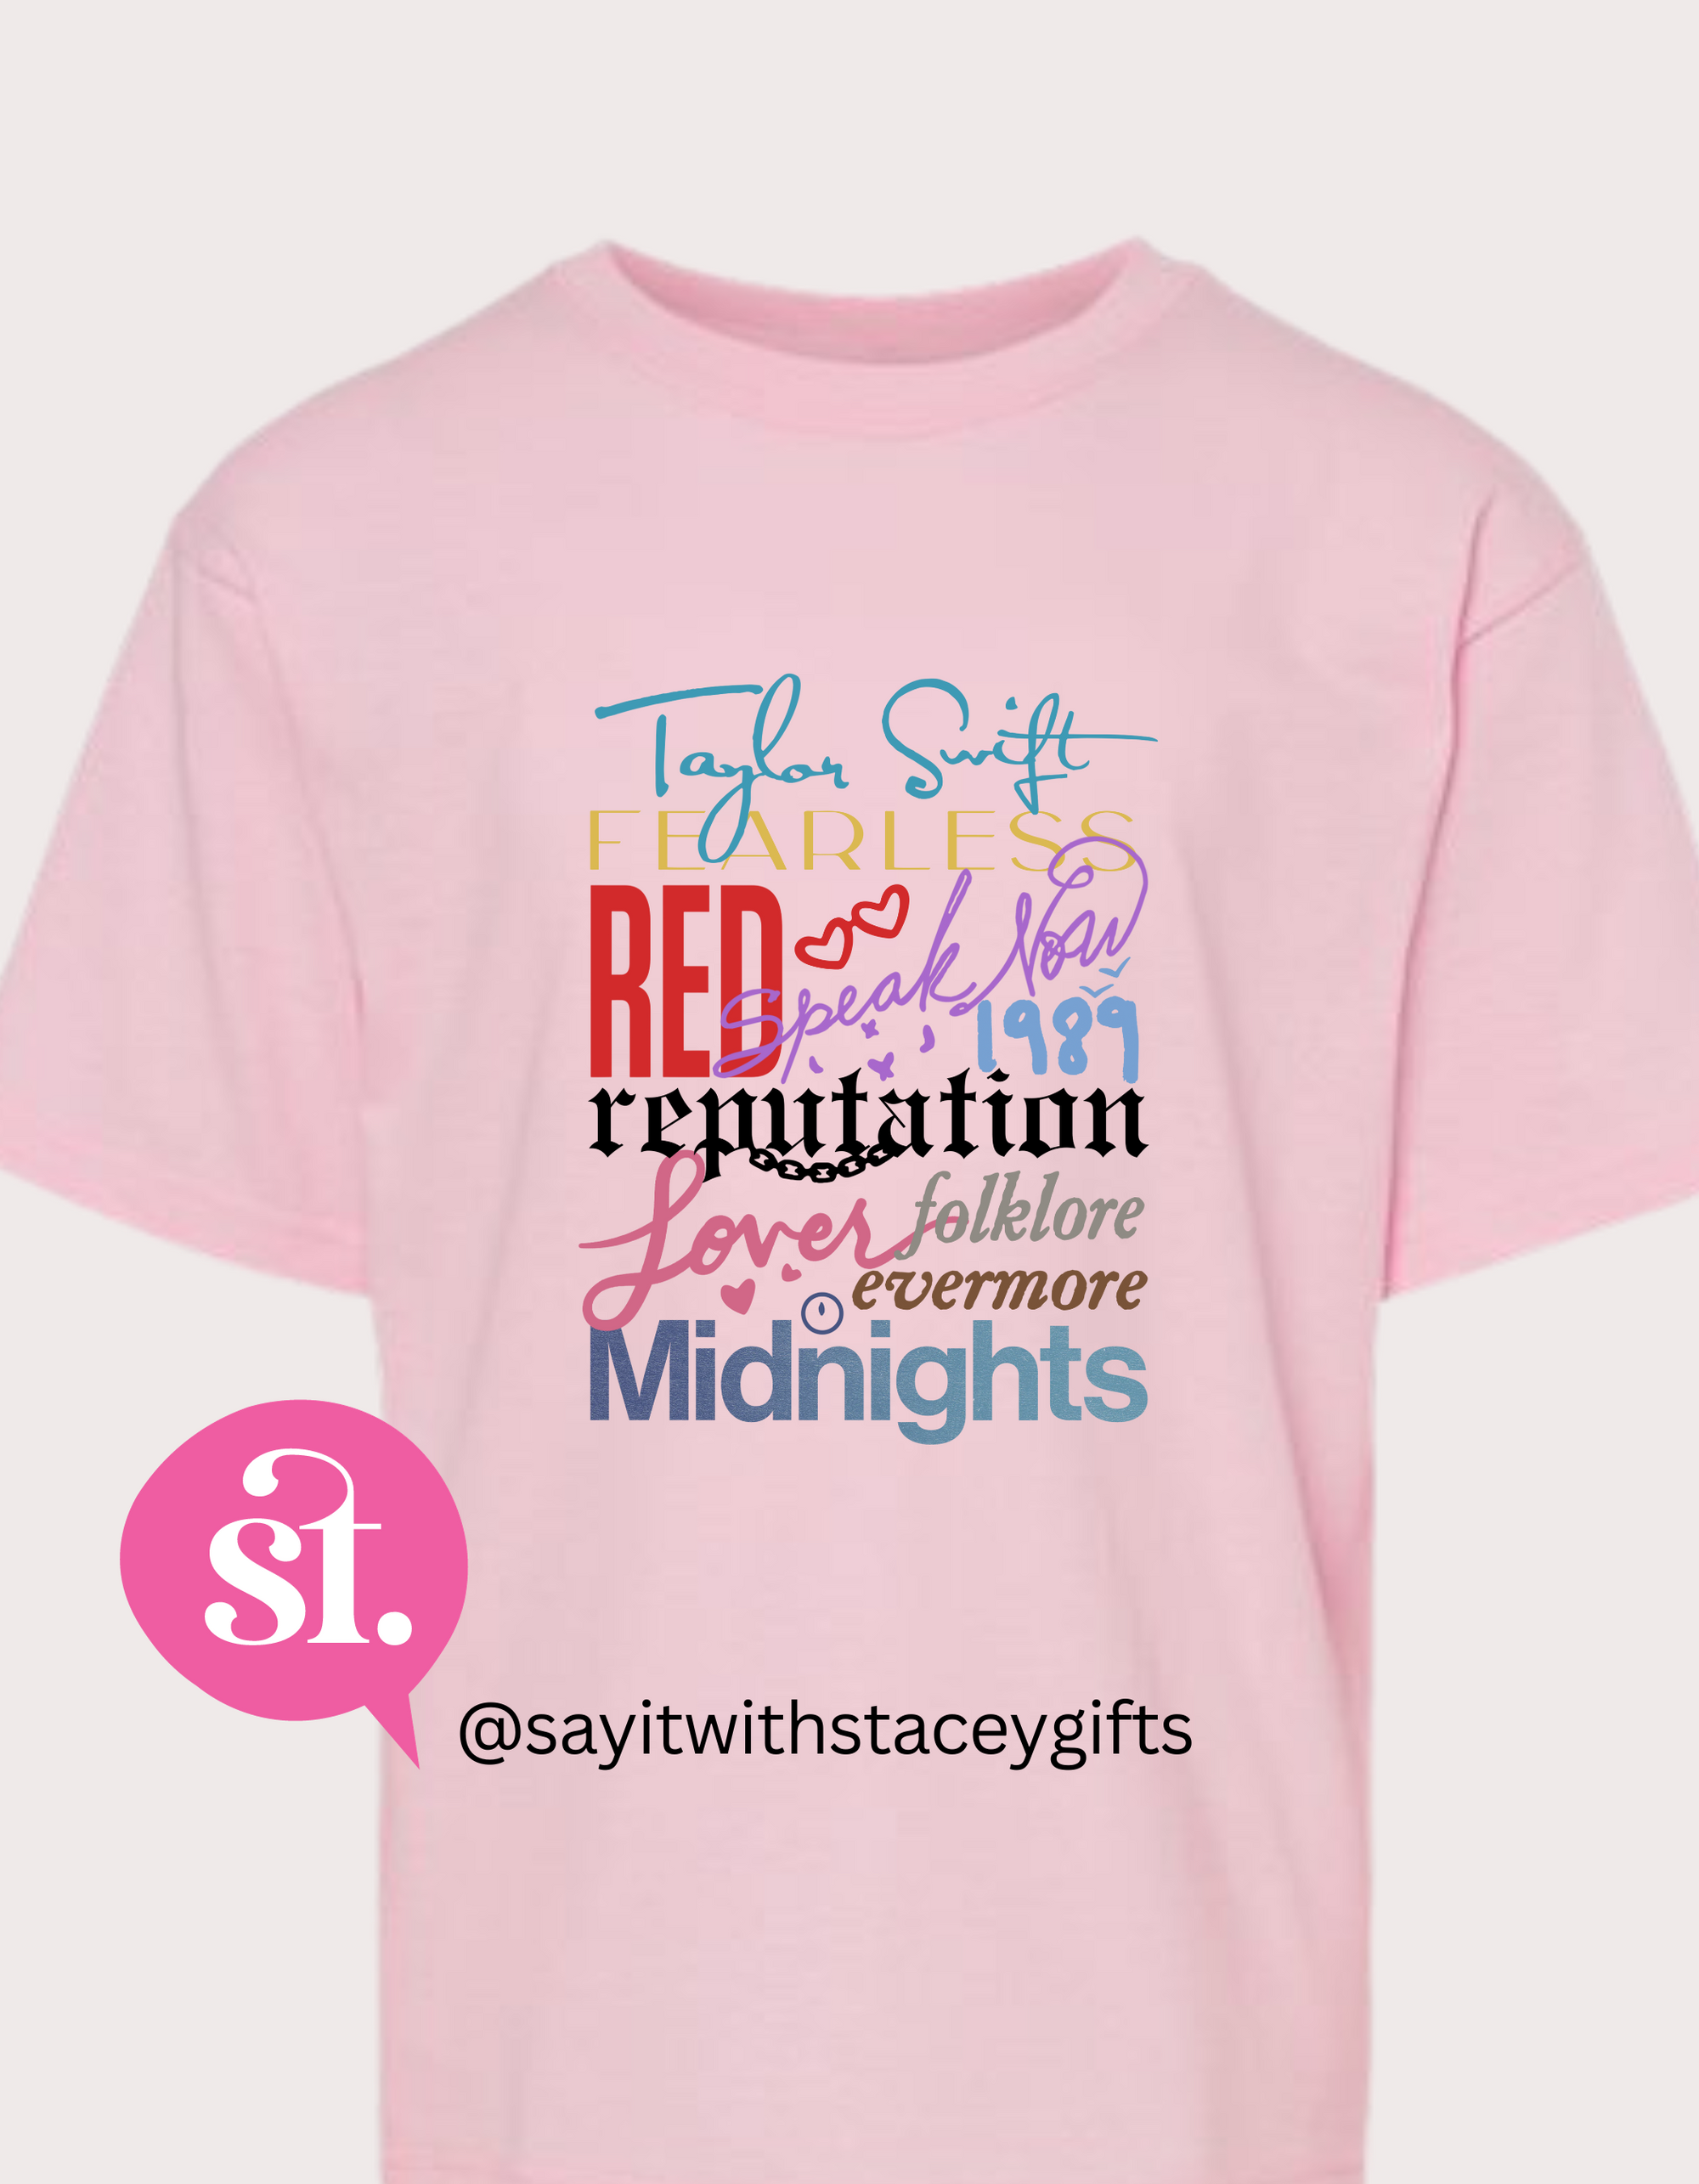 Taylor Swift Albums T-Shirt YOUTH SIZING